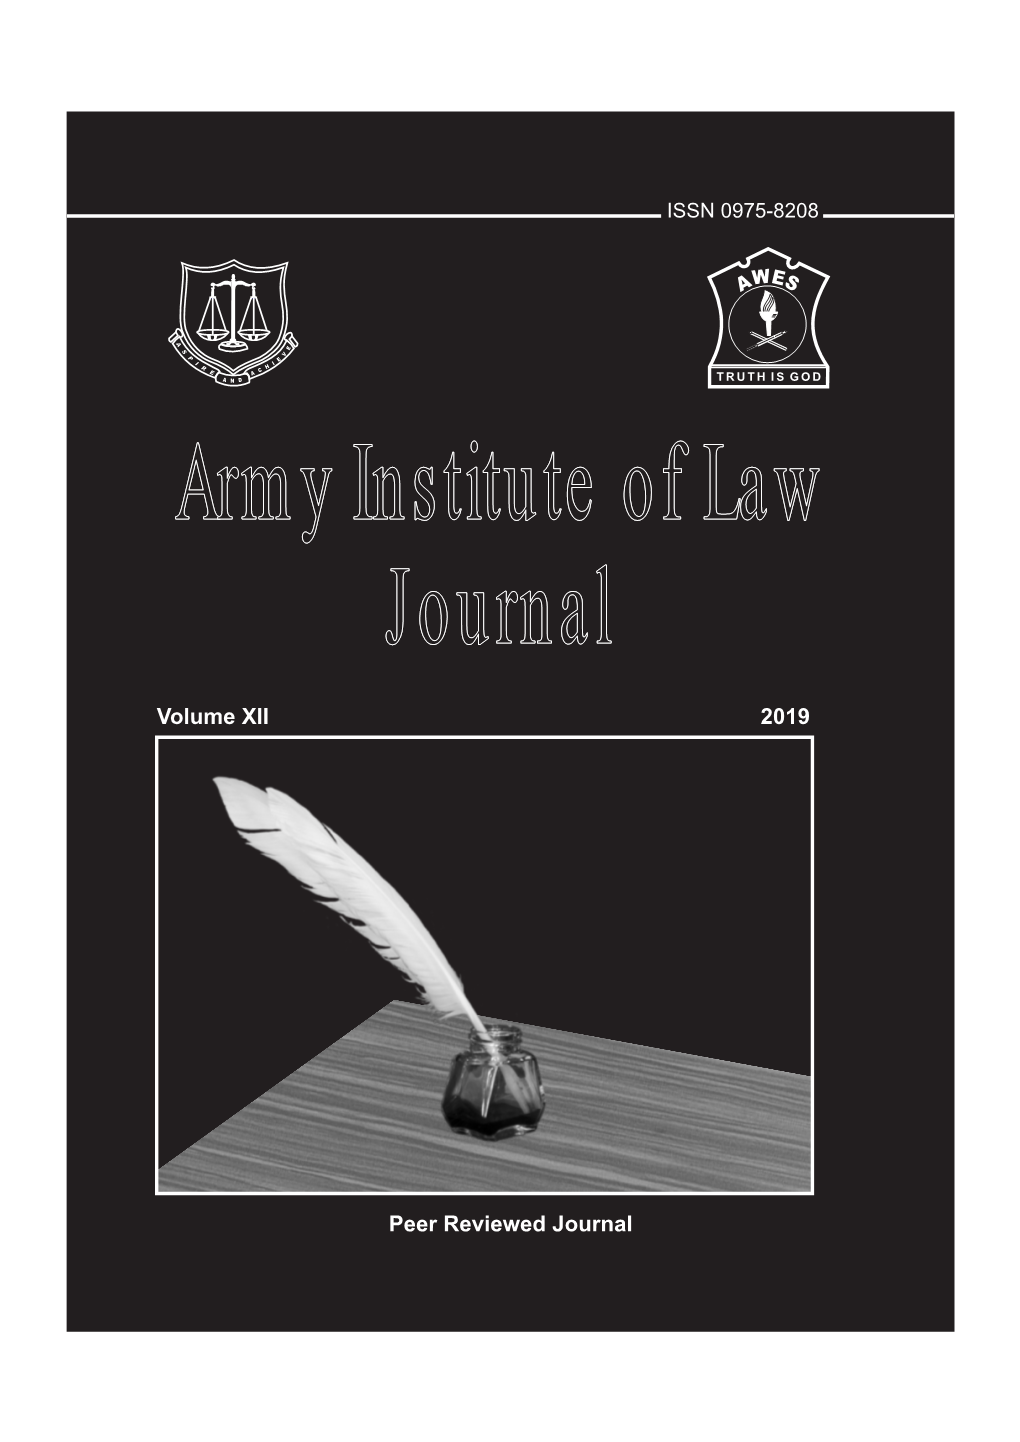 AIL Journal 2019” Singularly Belong to the Individual Authors and Do Not Belong to the Editorial Board Or the Army Institute of Law